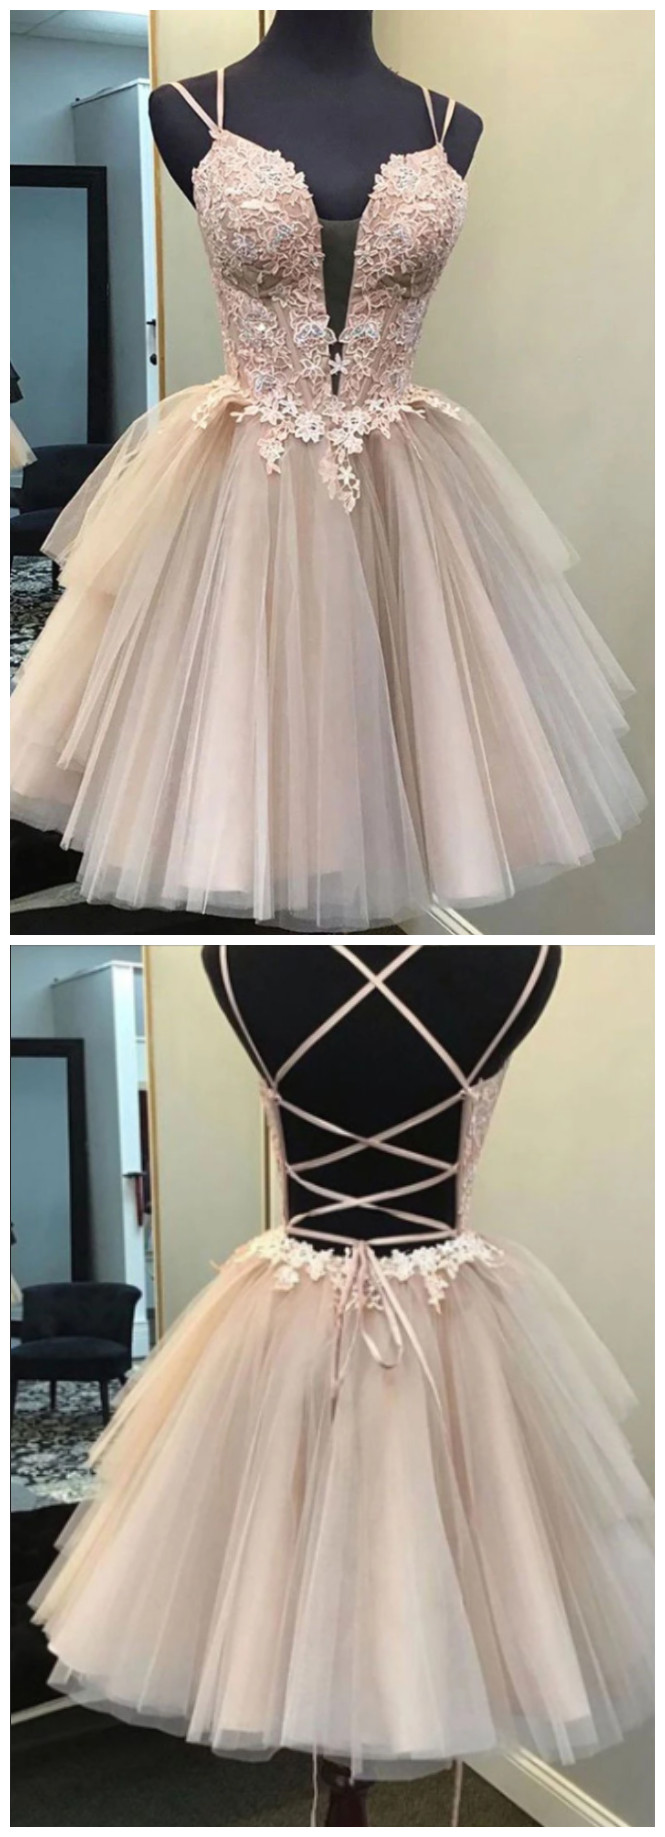 Champagne V Neck Tulle Lace Short Prom Dress Lace Homecoming Dress